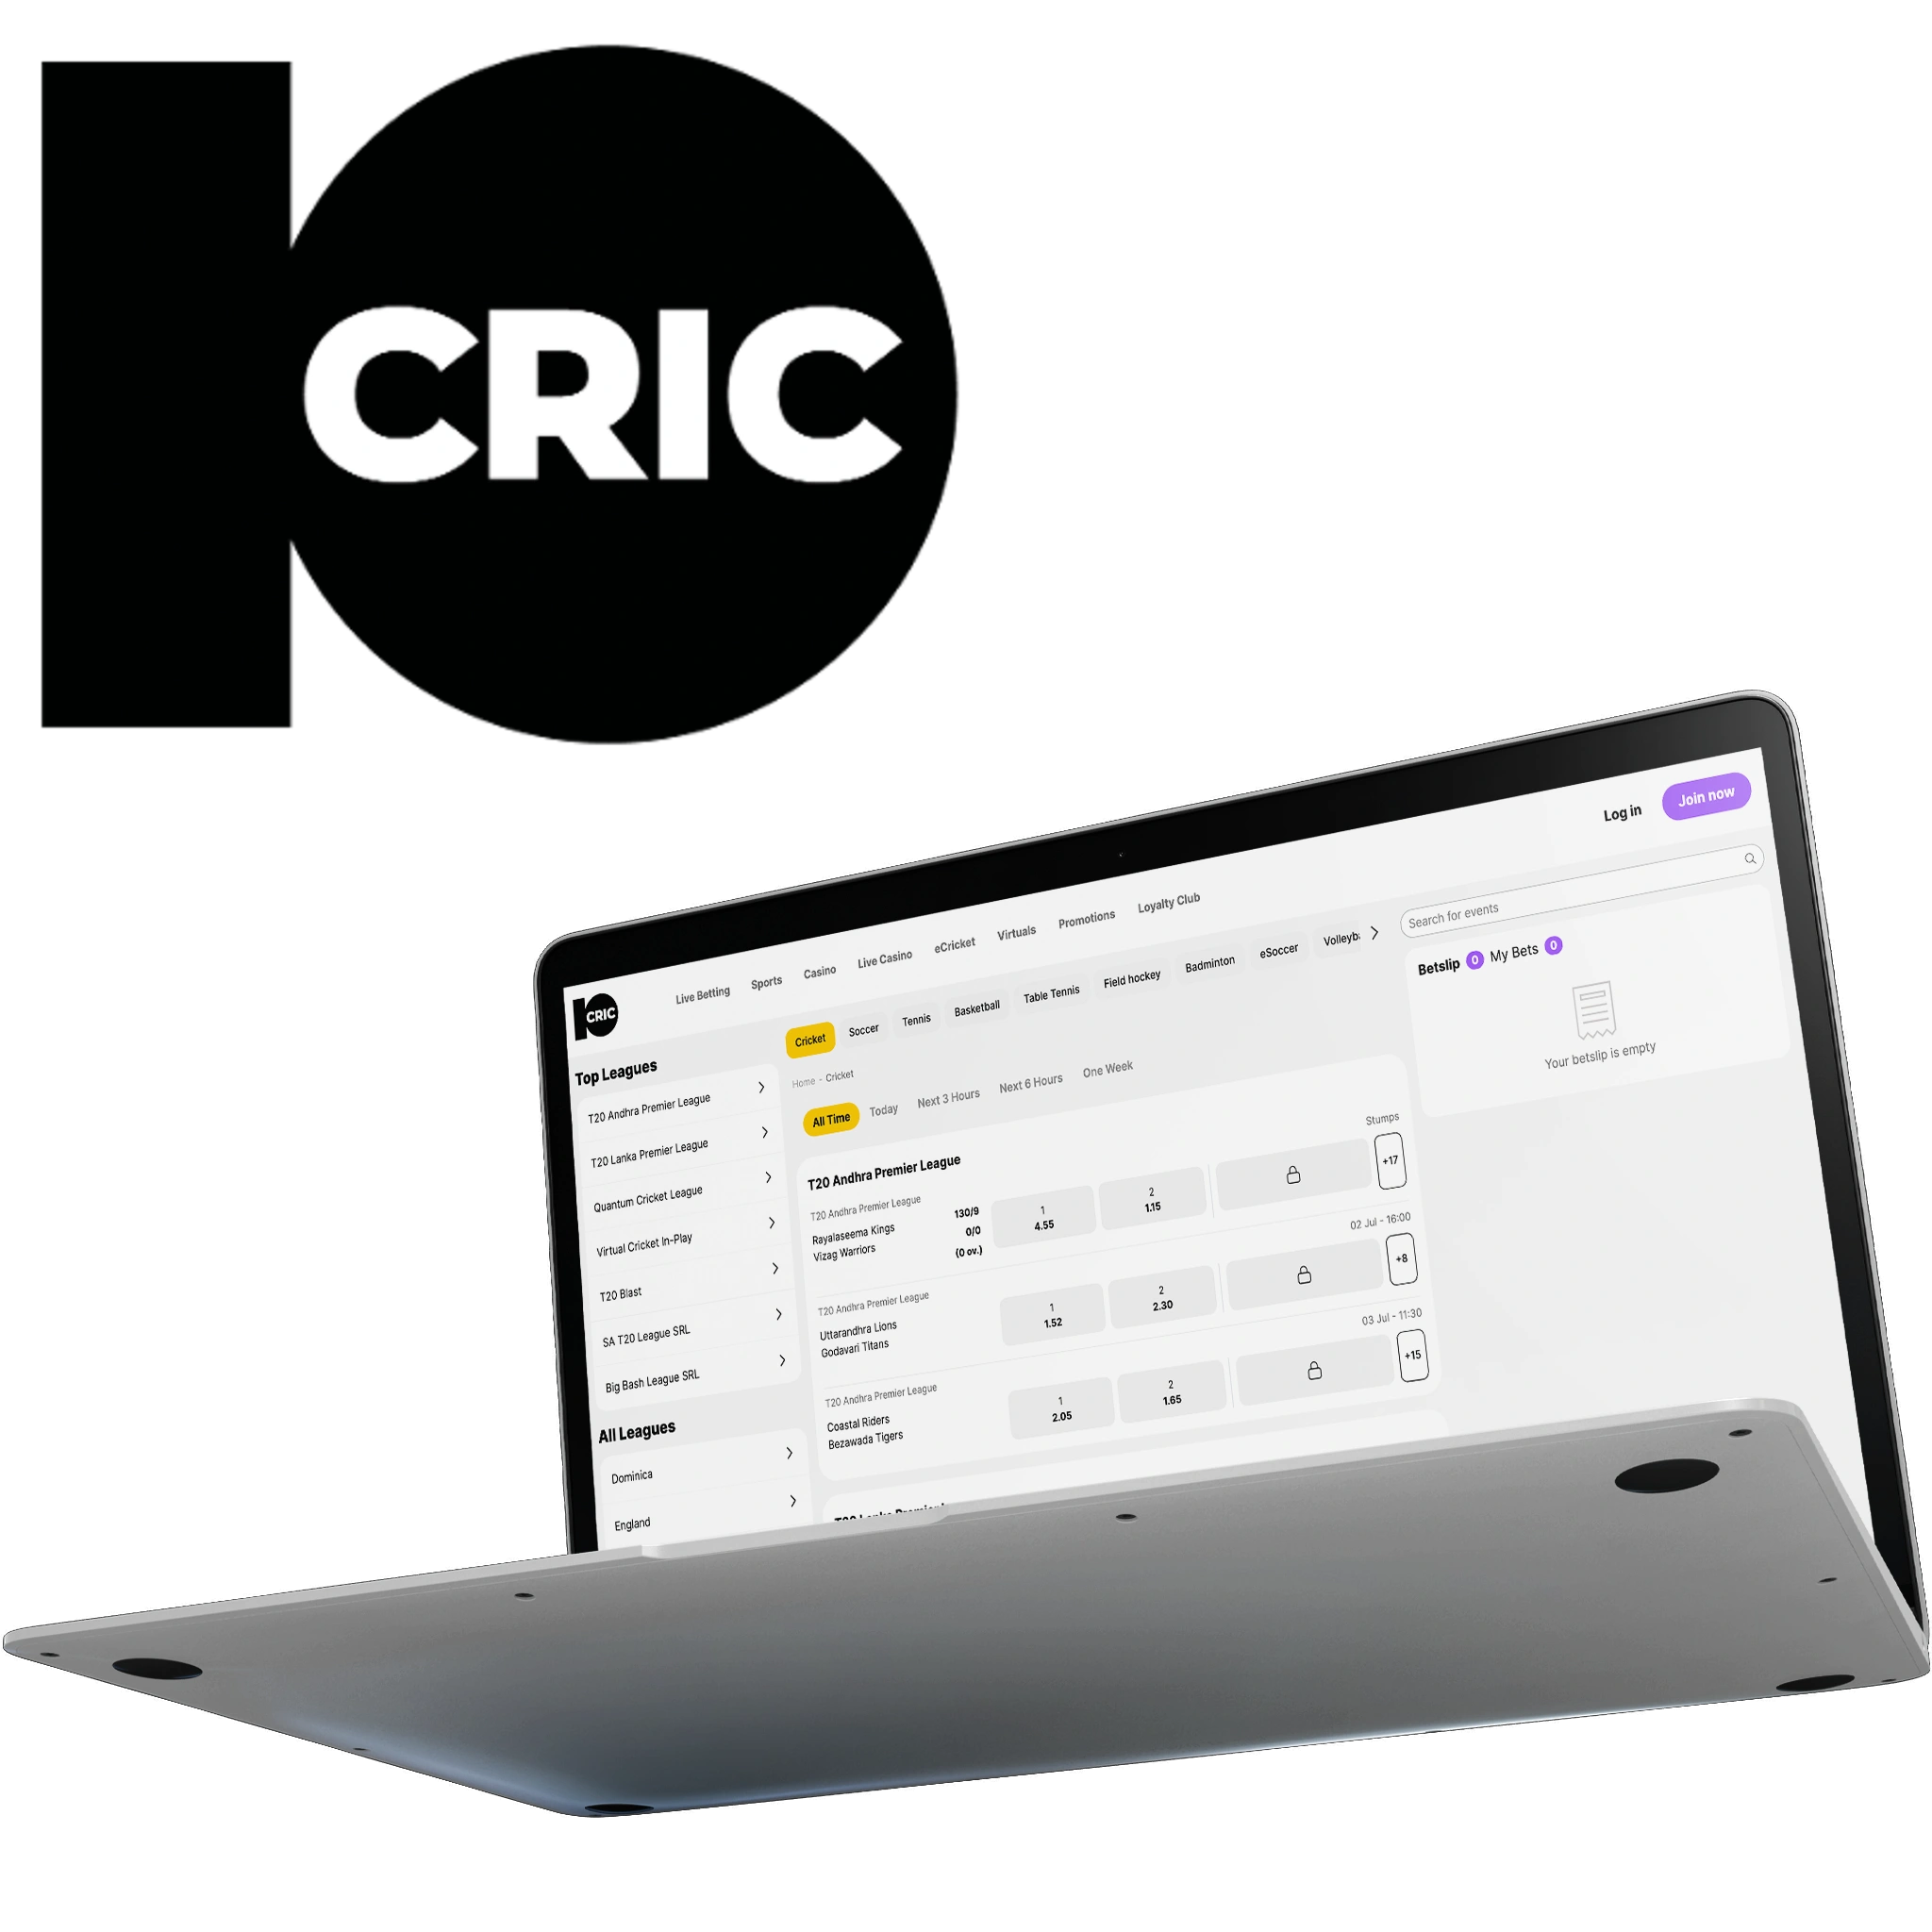 10cric is a legal and safe platform for daily cricket betting in India.